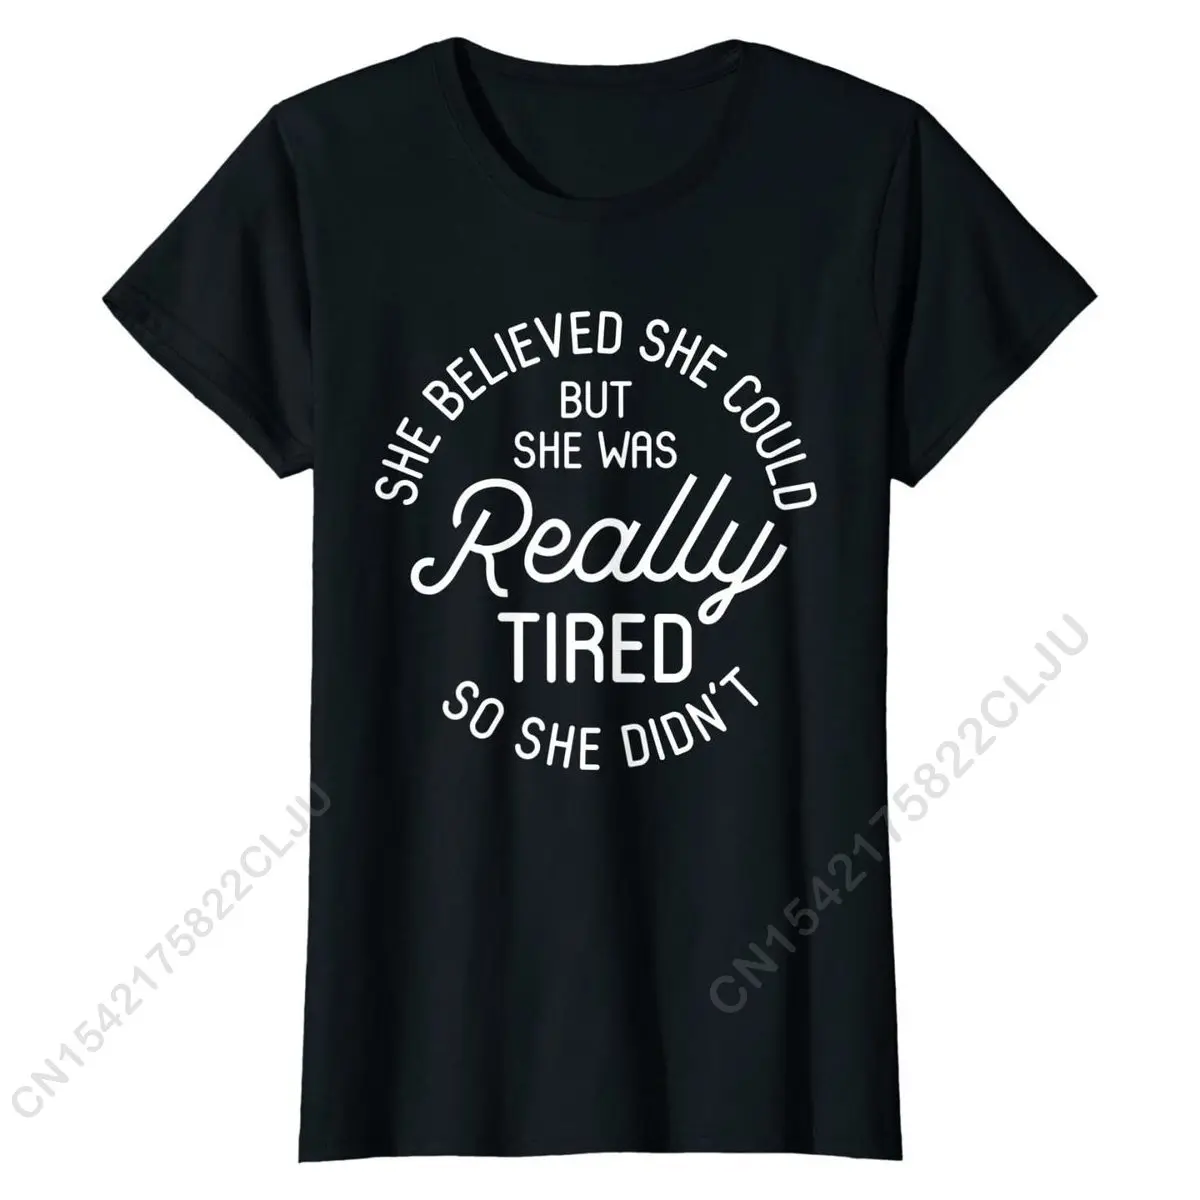 

She Believed She Could But She Didn't Funny Mom Life Shirt Geek Top Plain Cotton Mens Tees Funny